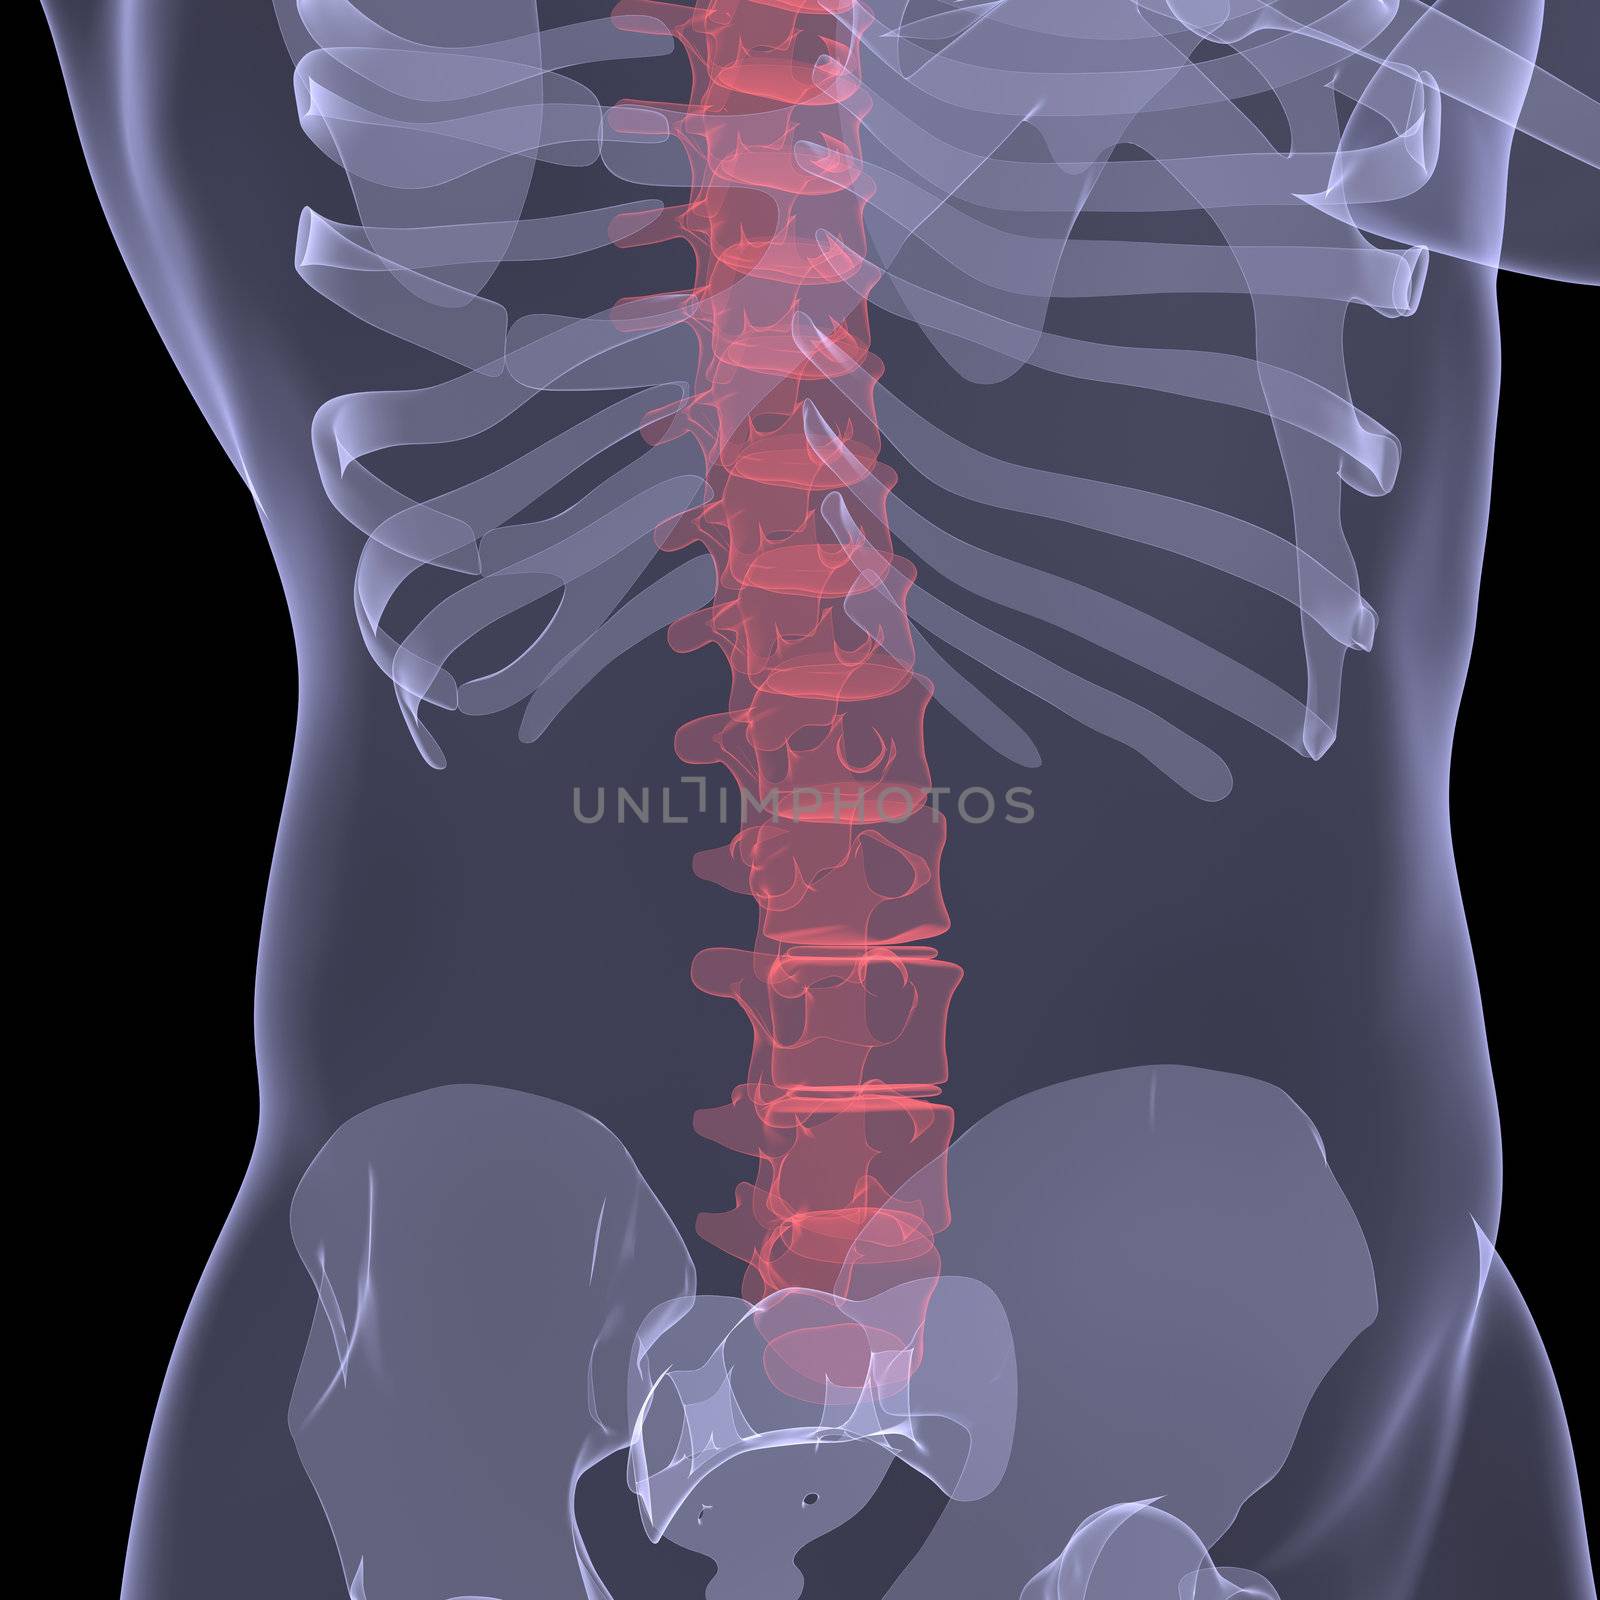 X-ray of the human spine. Render on a black background